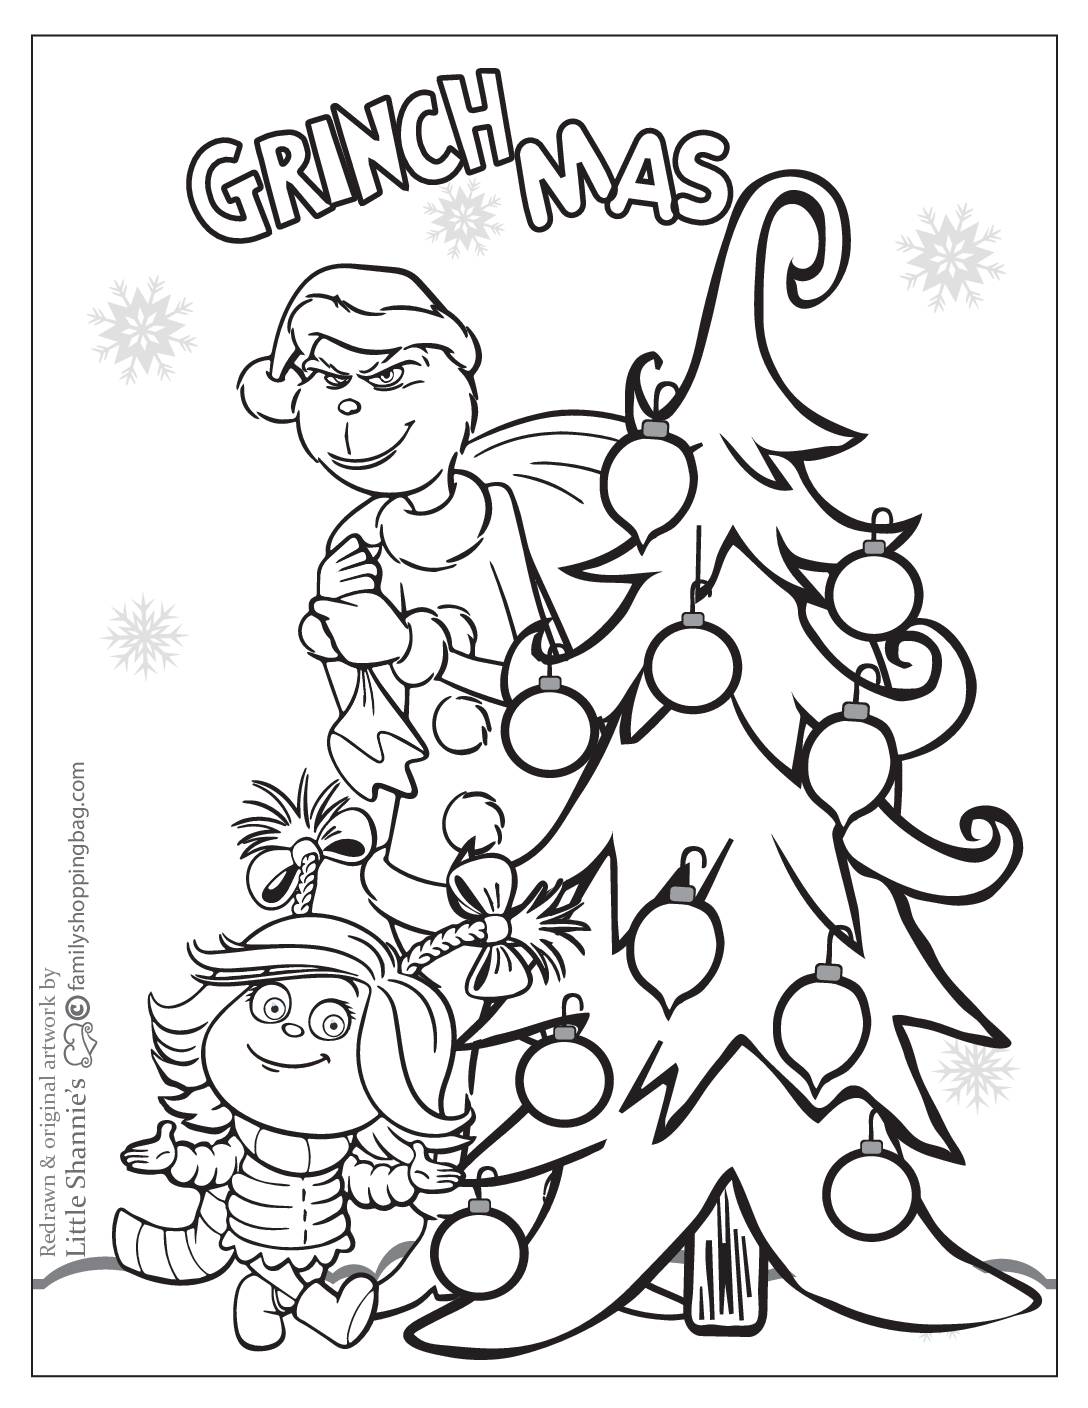 Coloring page grinch